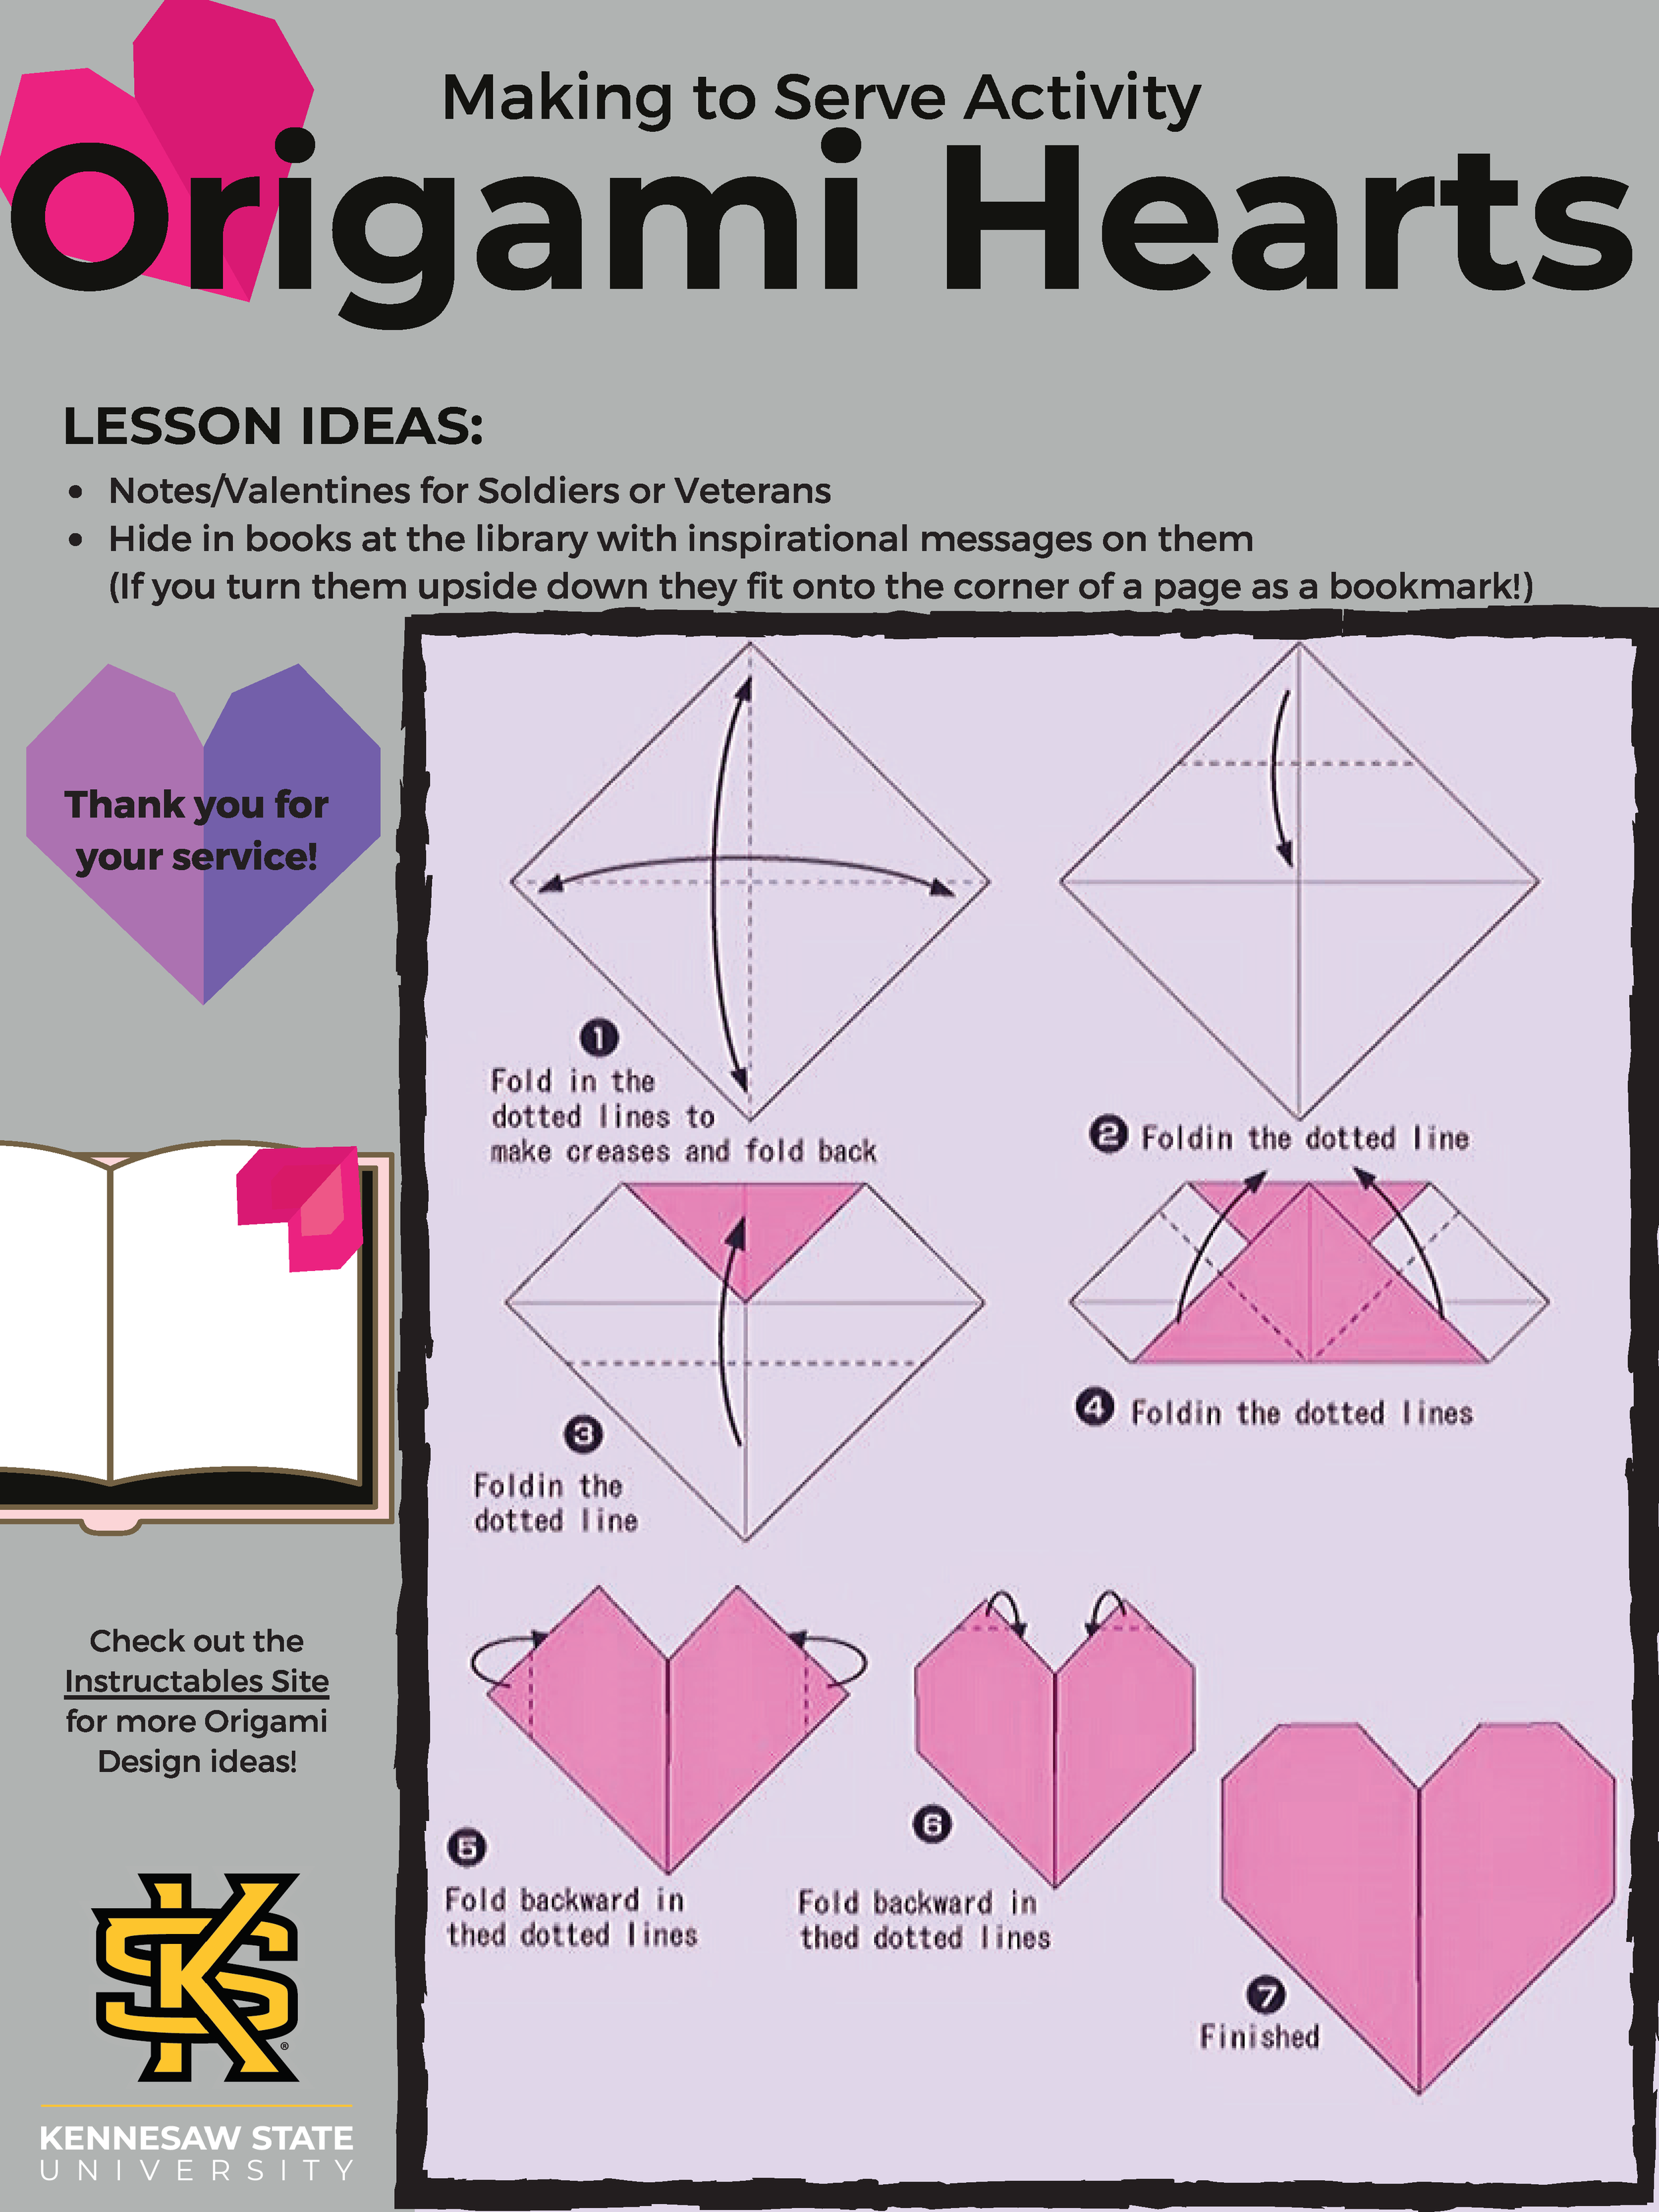 Origami Heart-Making to Serve.png